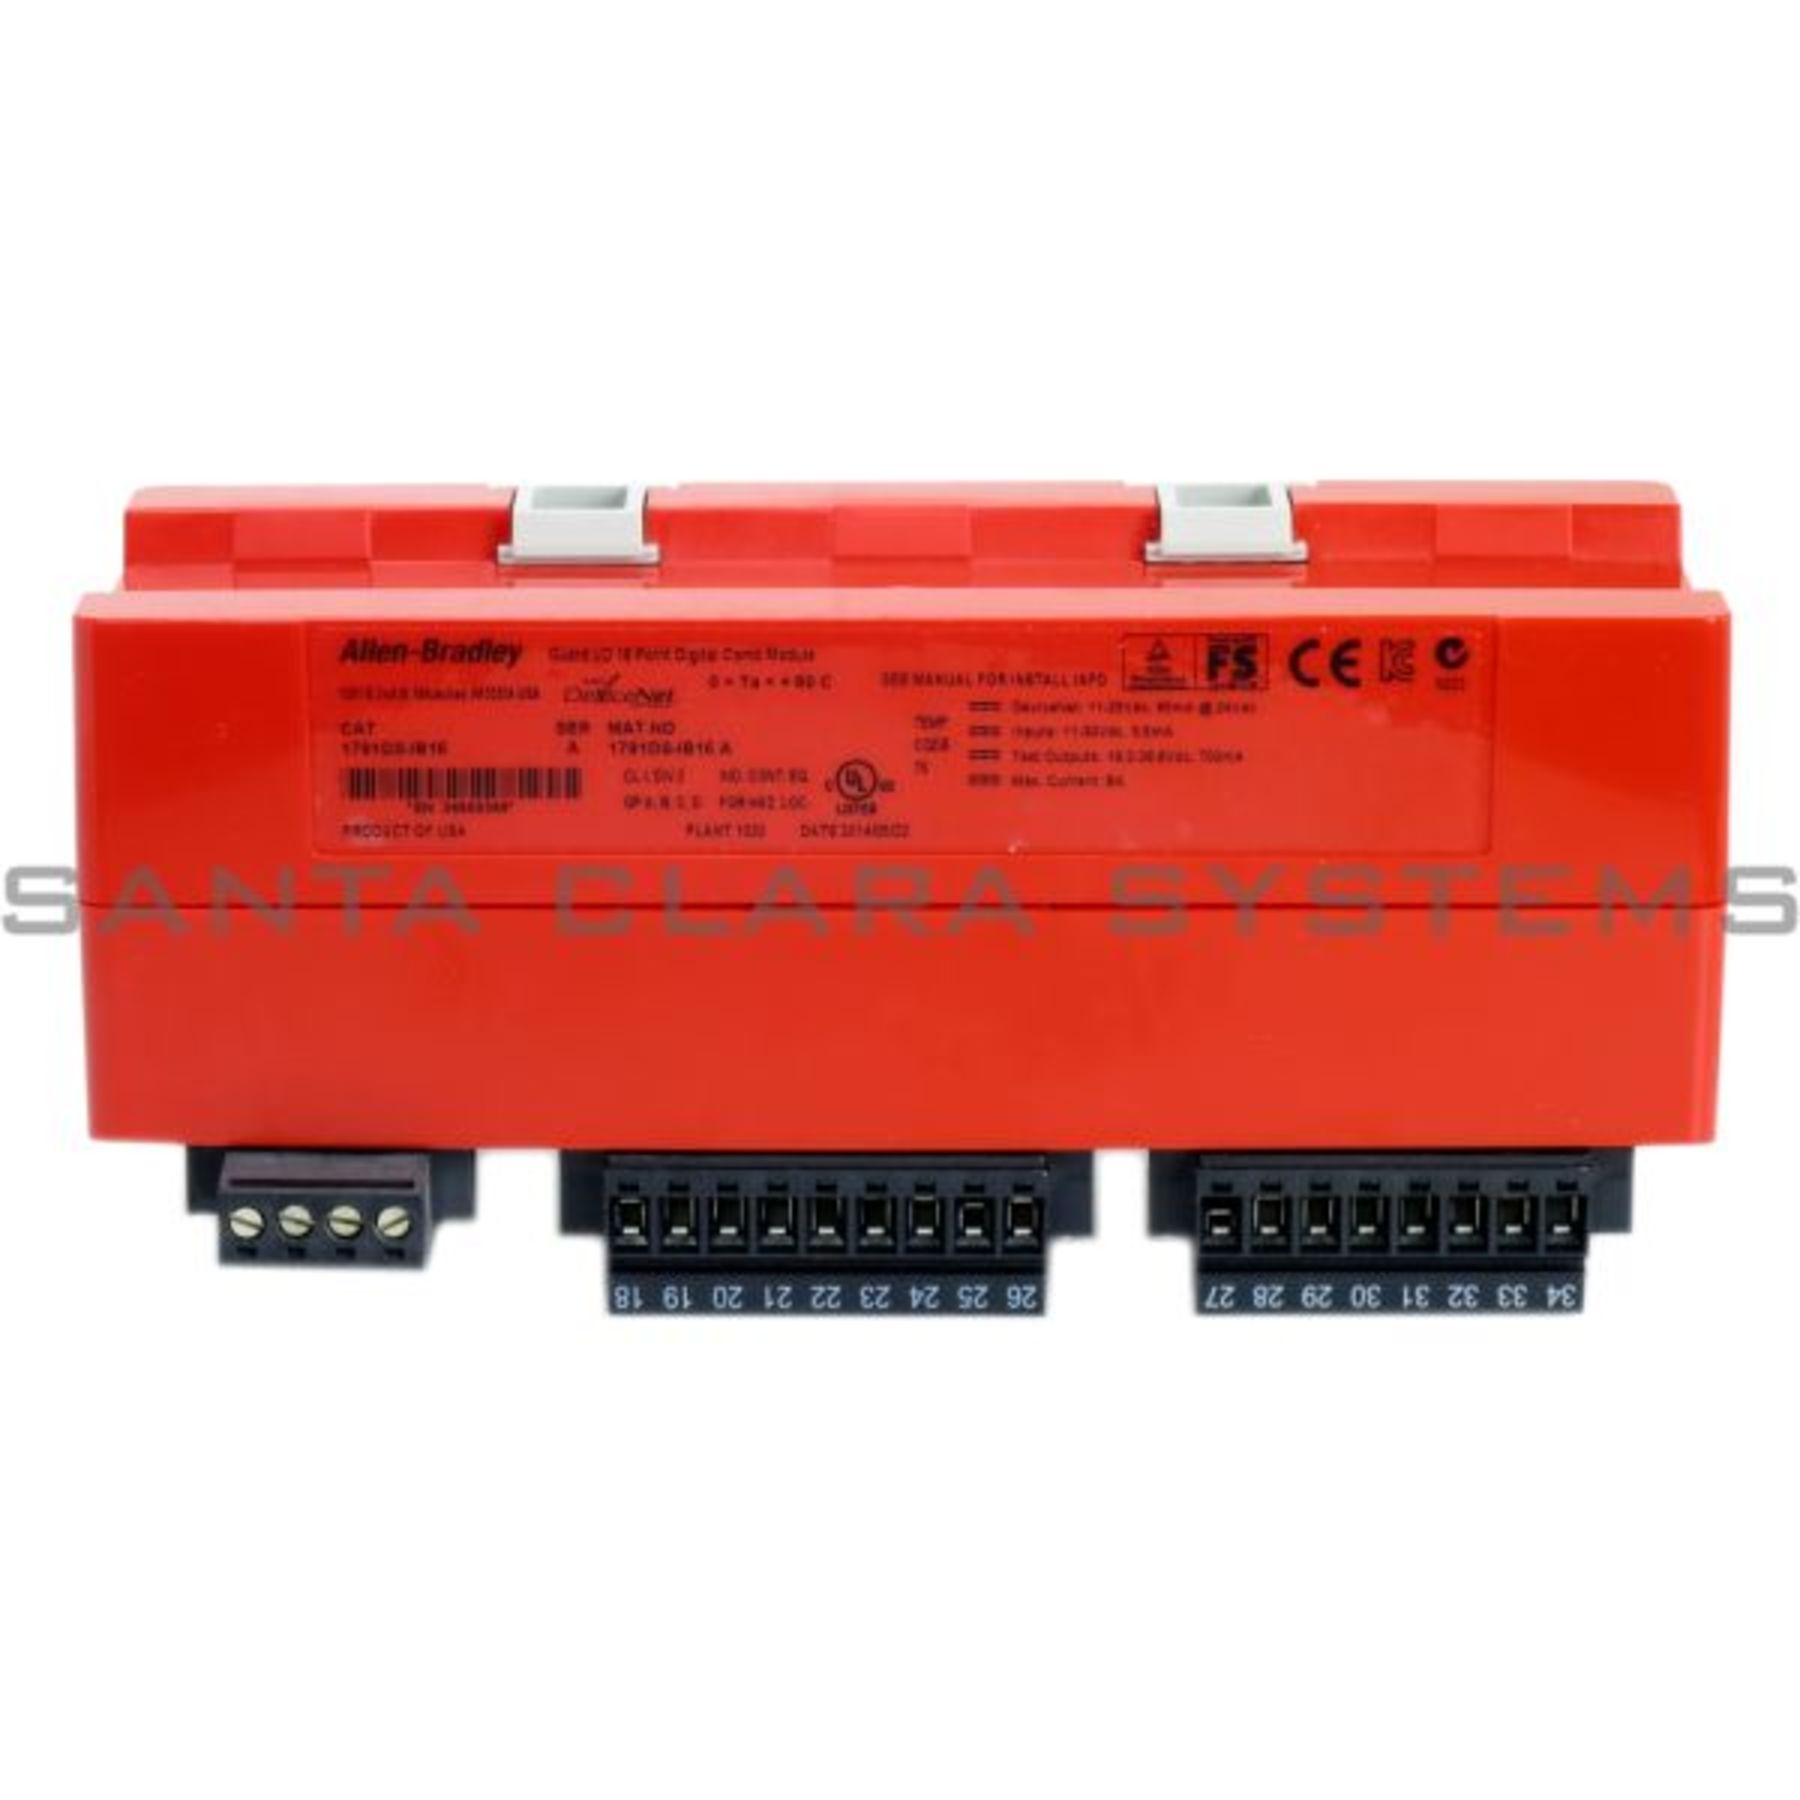 1791DS-IB16 Safety Module | Compactblock Guard I/O DeviceNet In